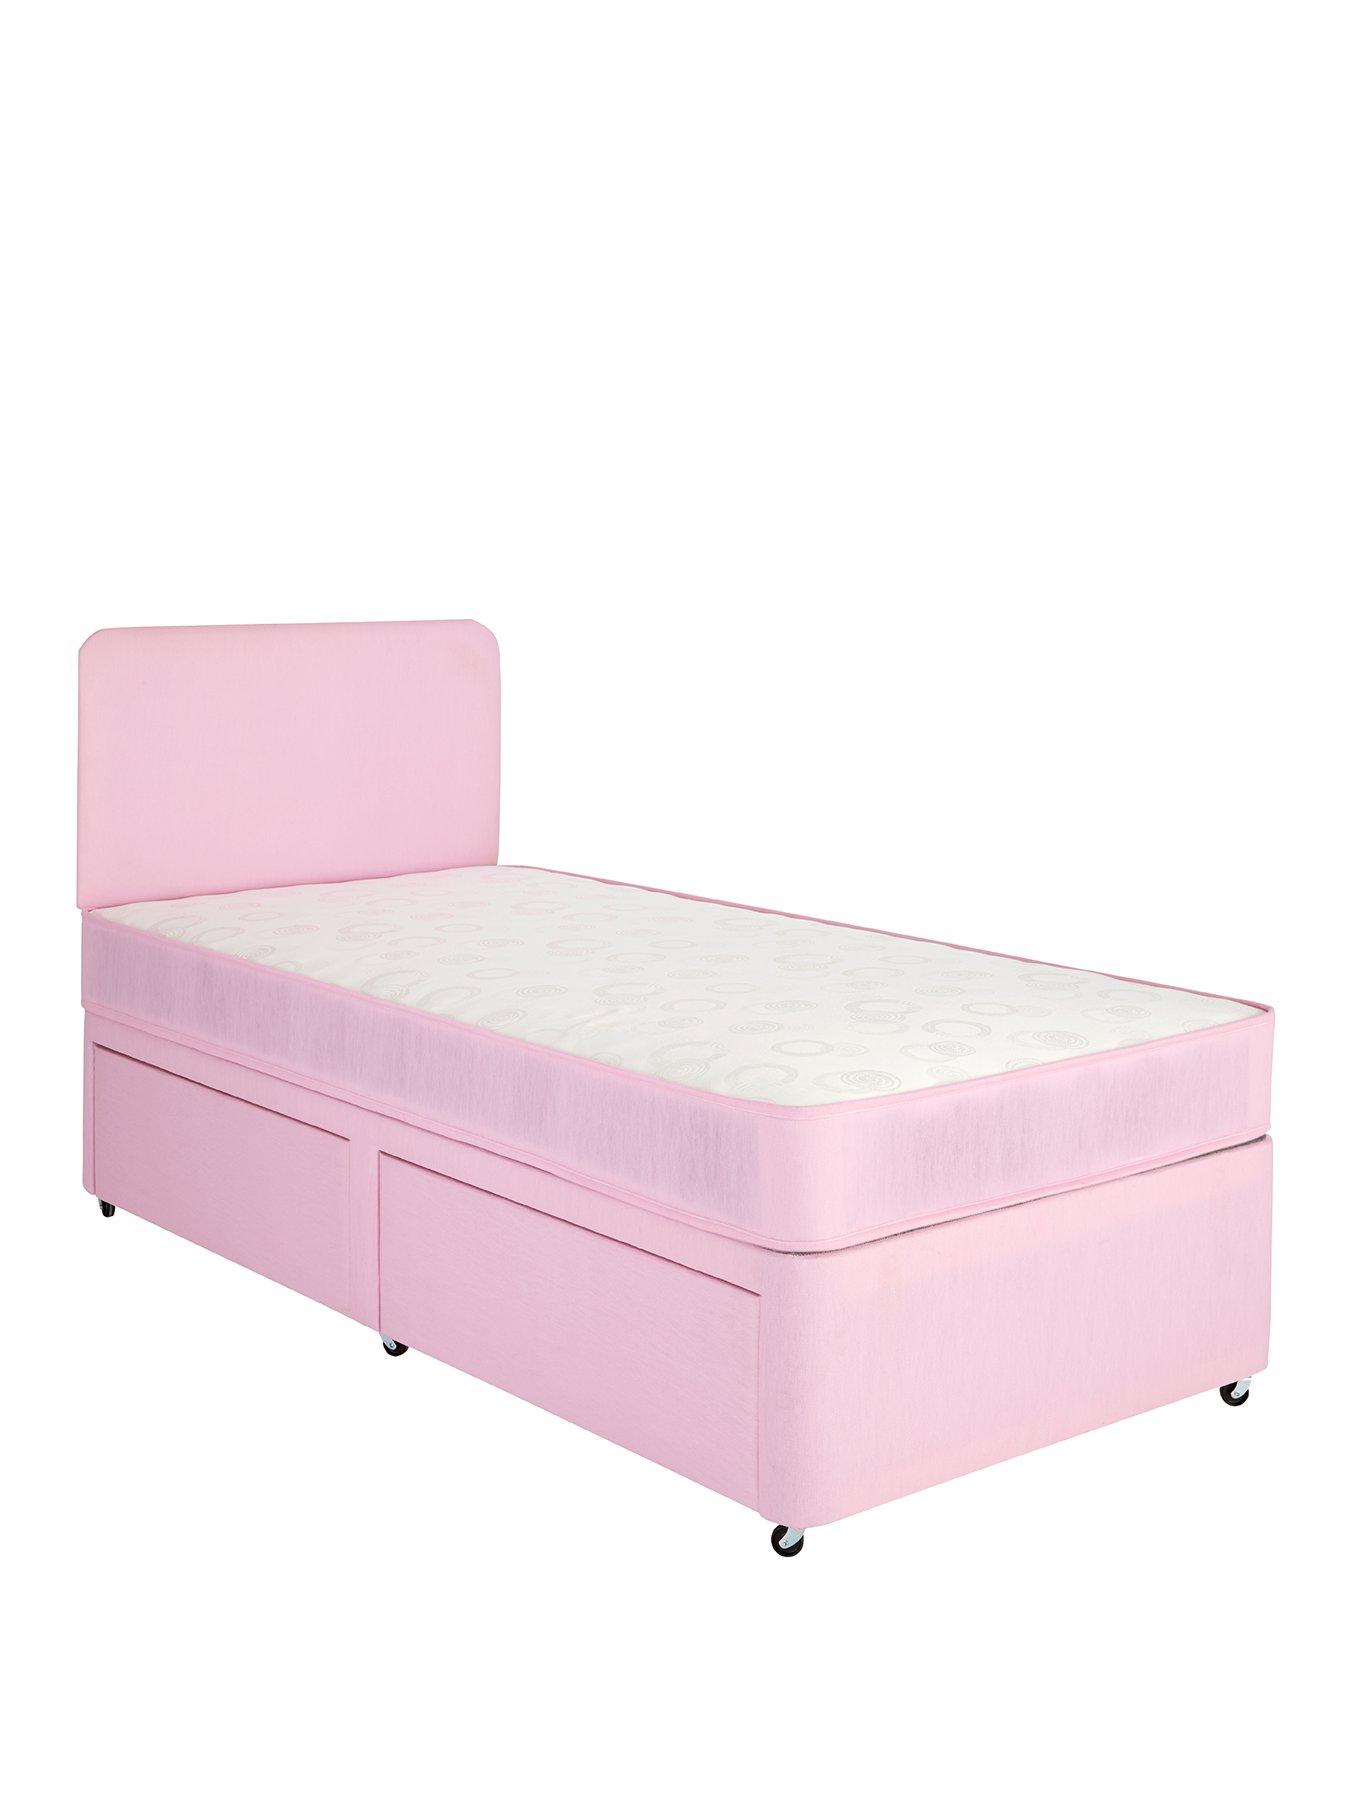 baby pink bed frame